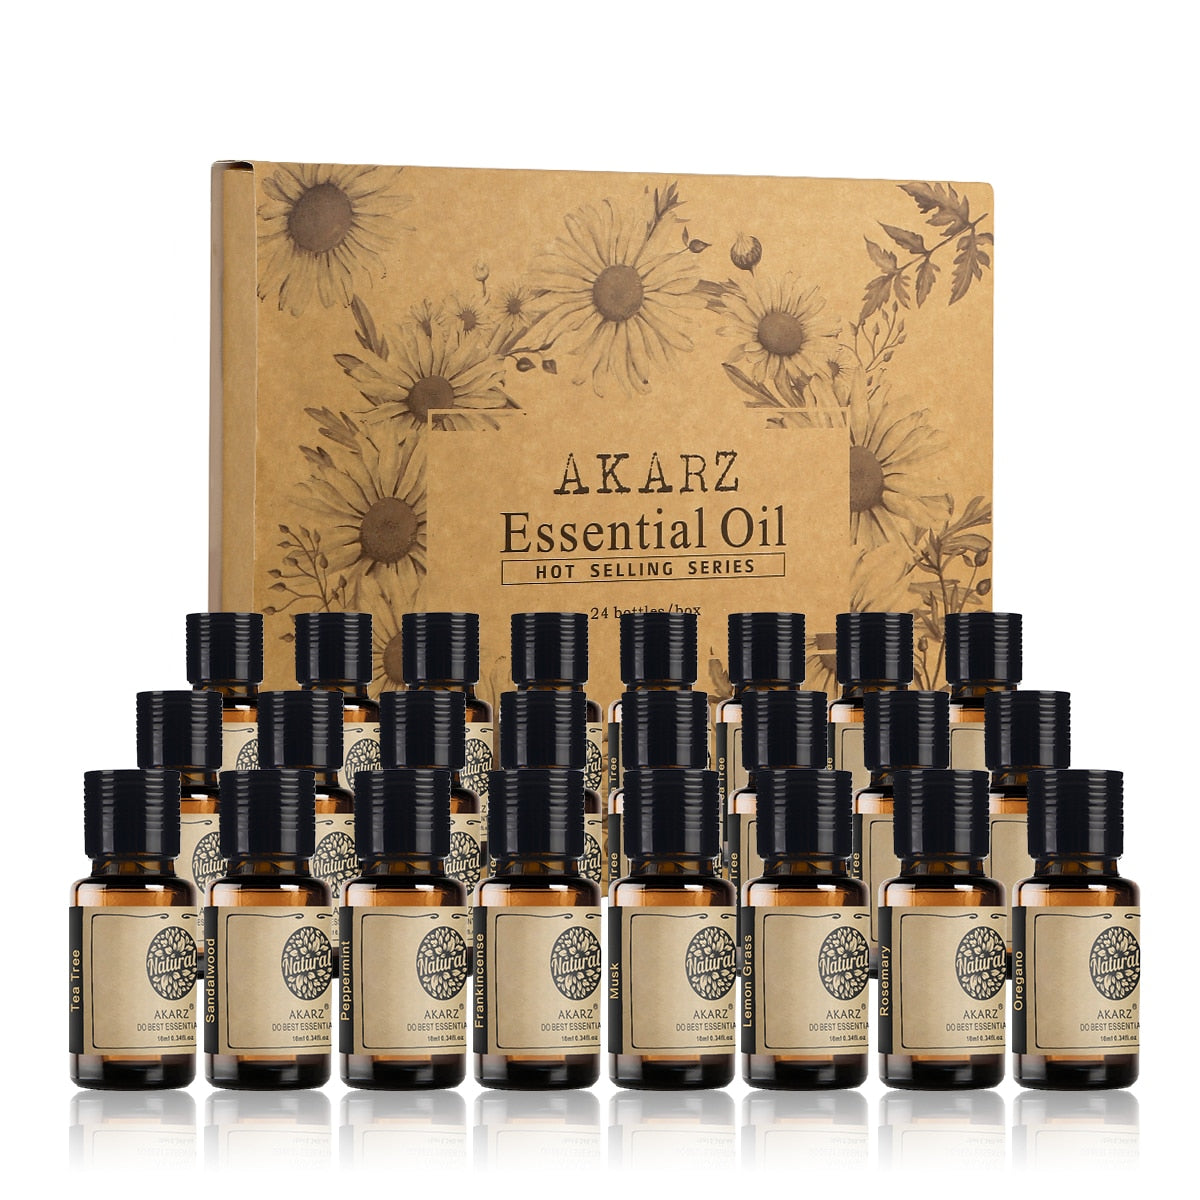 AKARZ Hots 24 Sets Essential Oils Elegant Packaging For Perfect Gift Aromatherapy Oil for Humidifier, Diffuser, Bath, Spa, Massage, Perfume, Home Cleaning and More